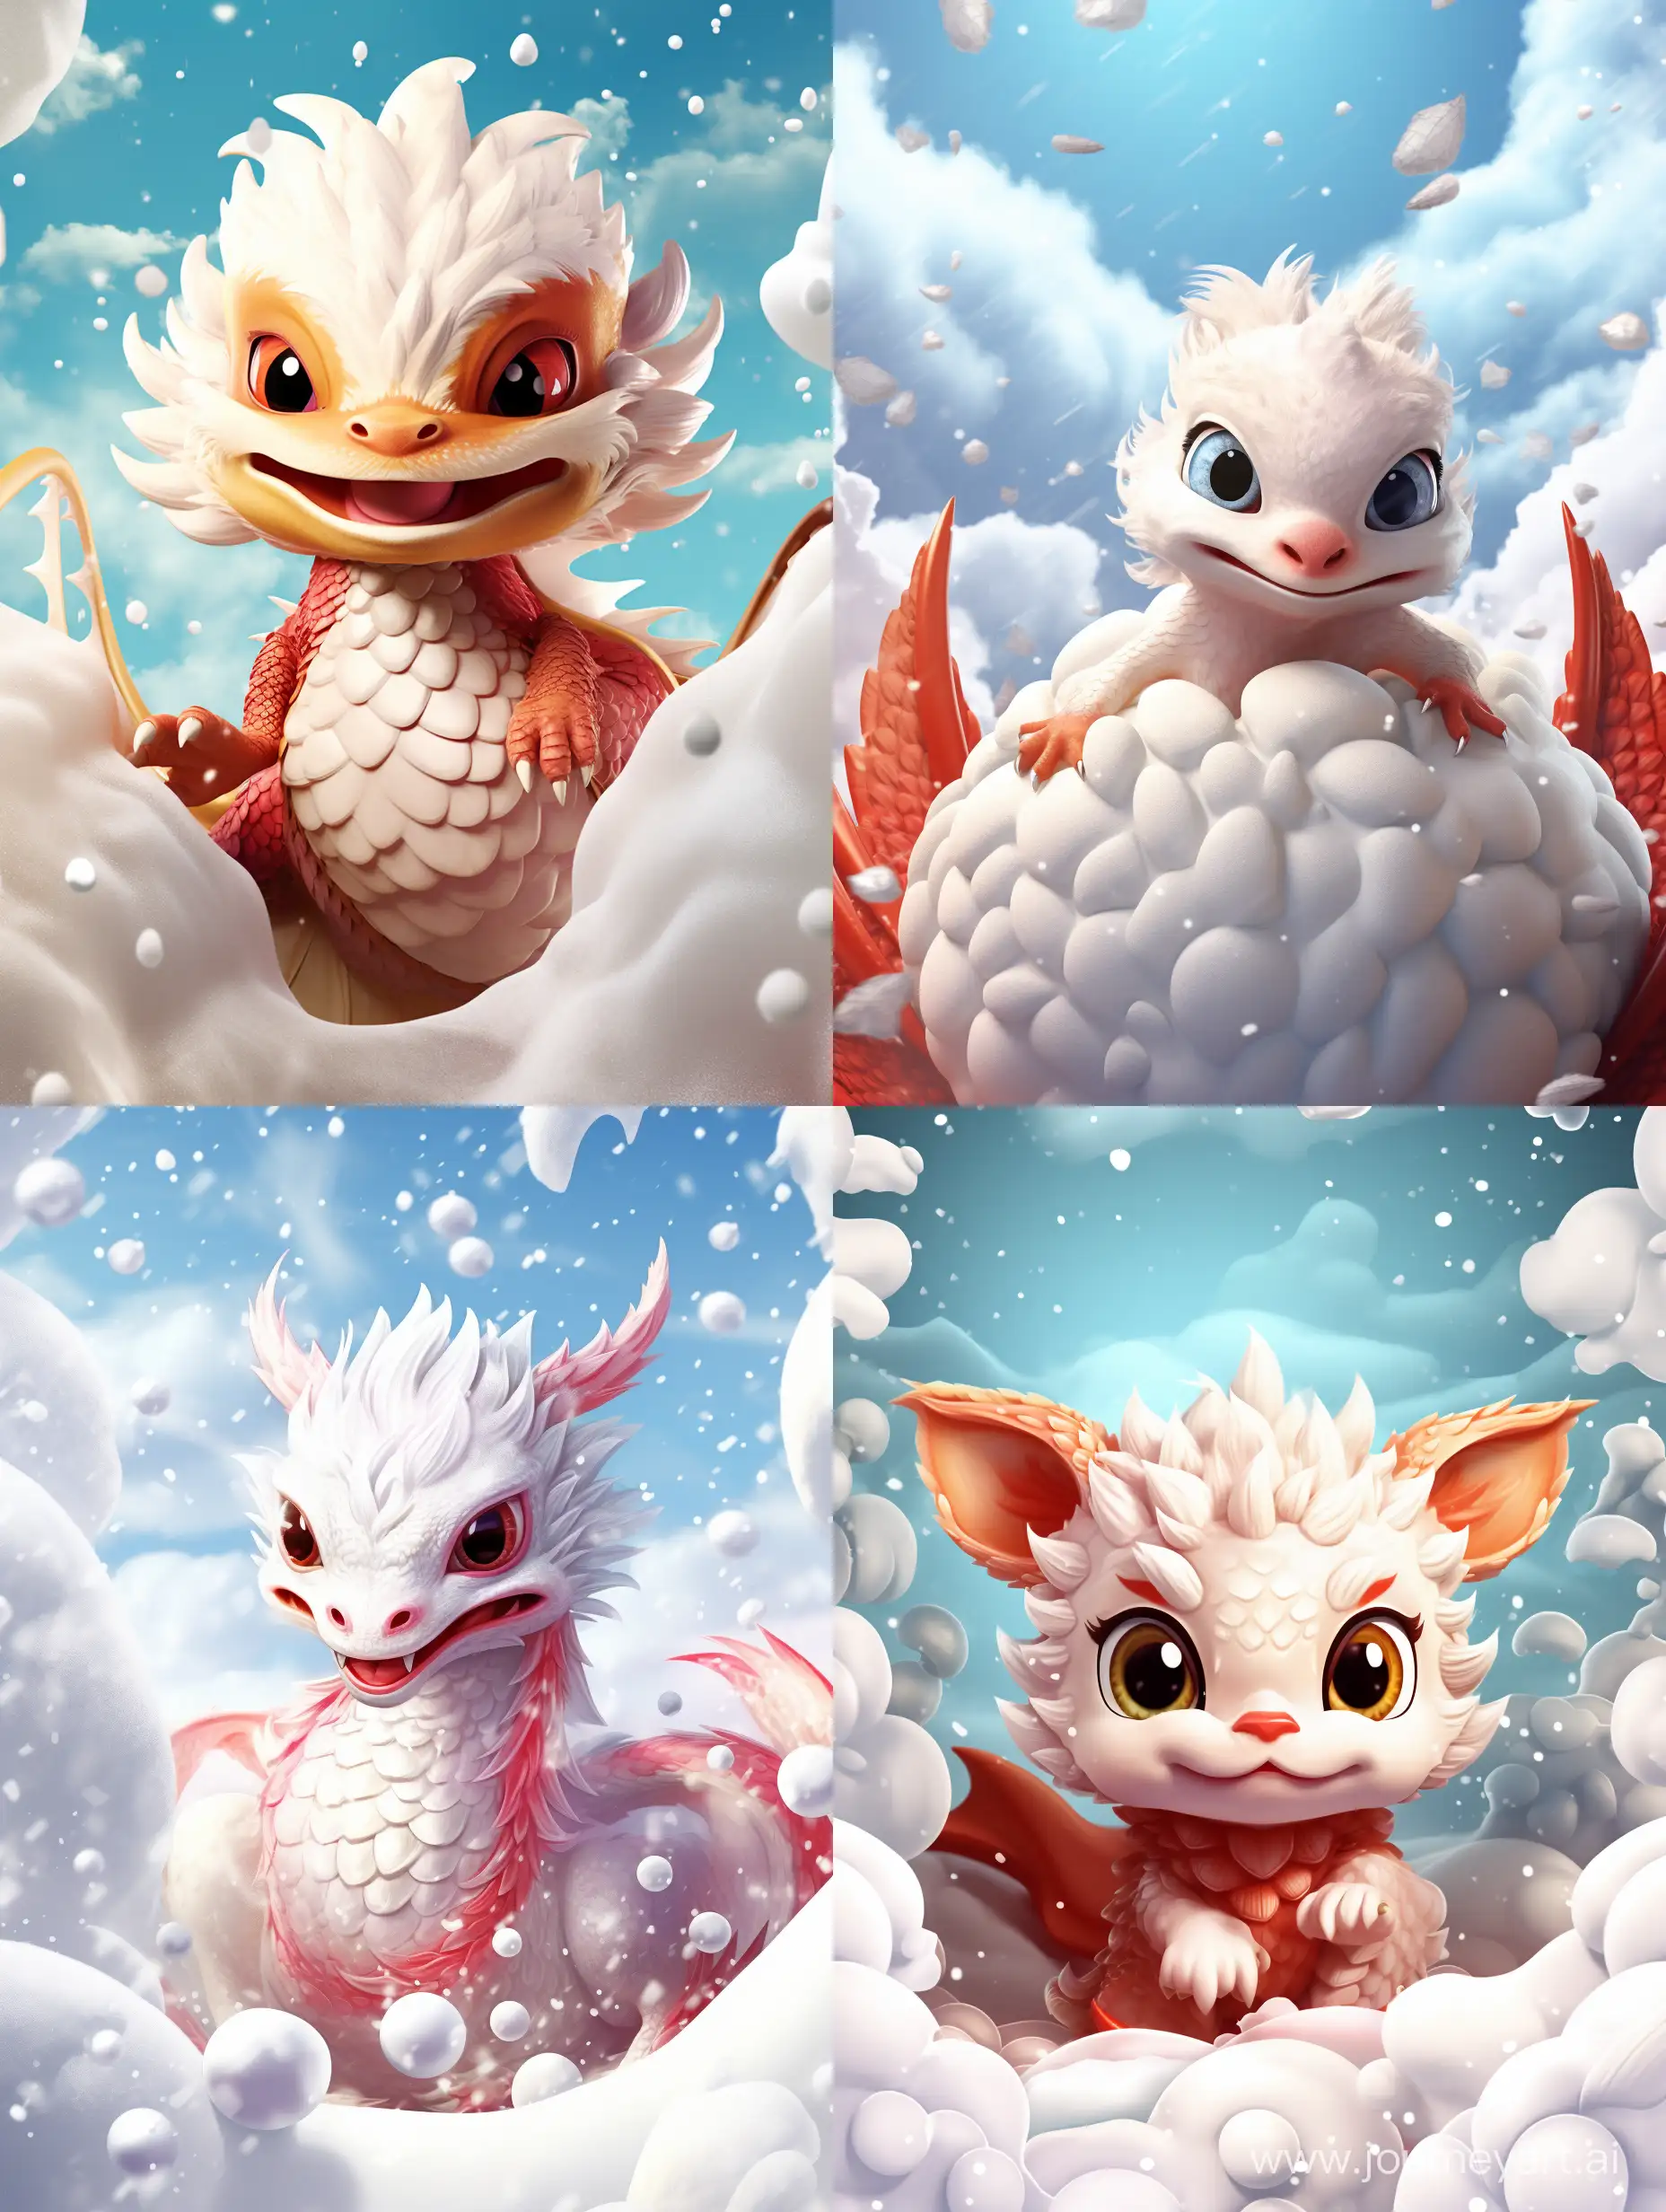 Adorable-Red-Dragon-Hatchling-in-Snowy-Wonderland-Chinese-Traditional-Style-Photo